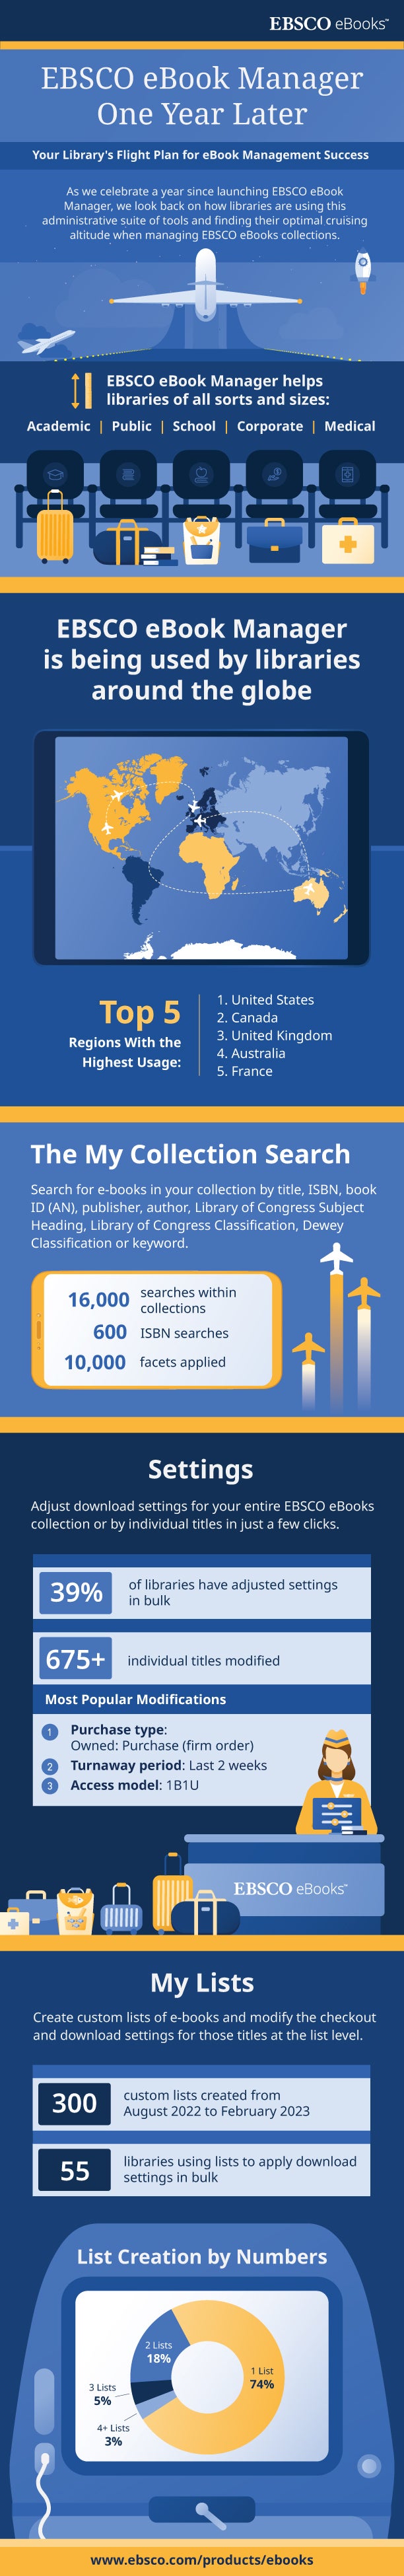 EBSCO eBook Manager One Year Later Infographic   